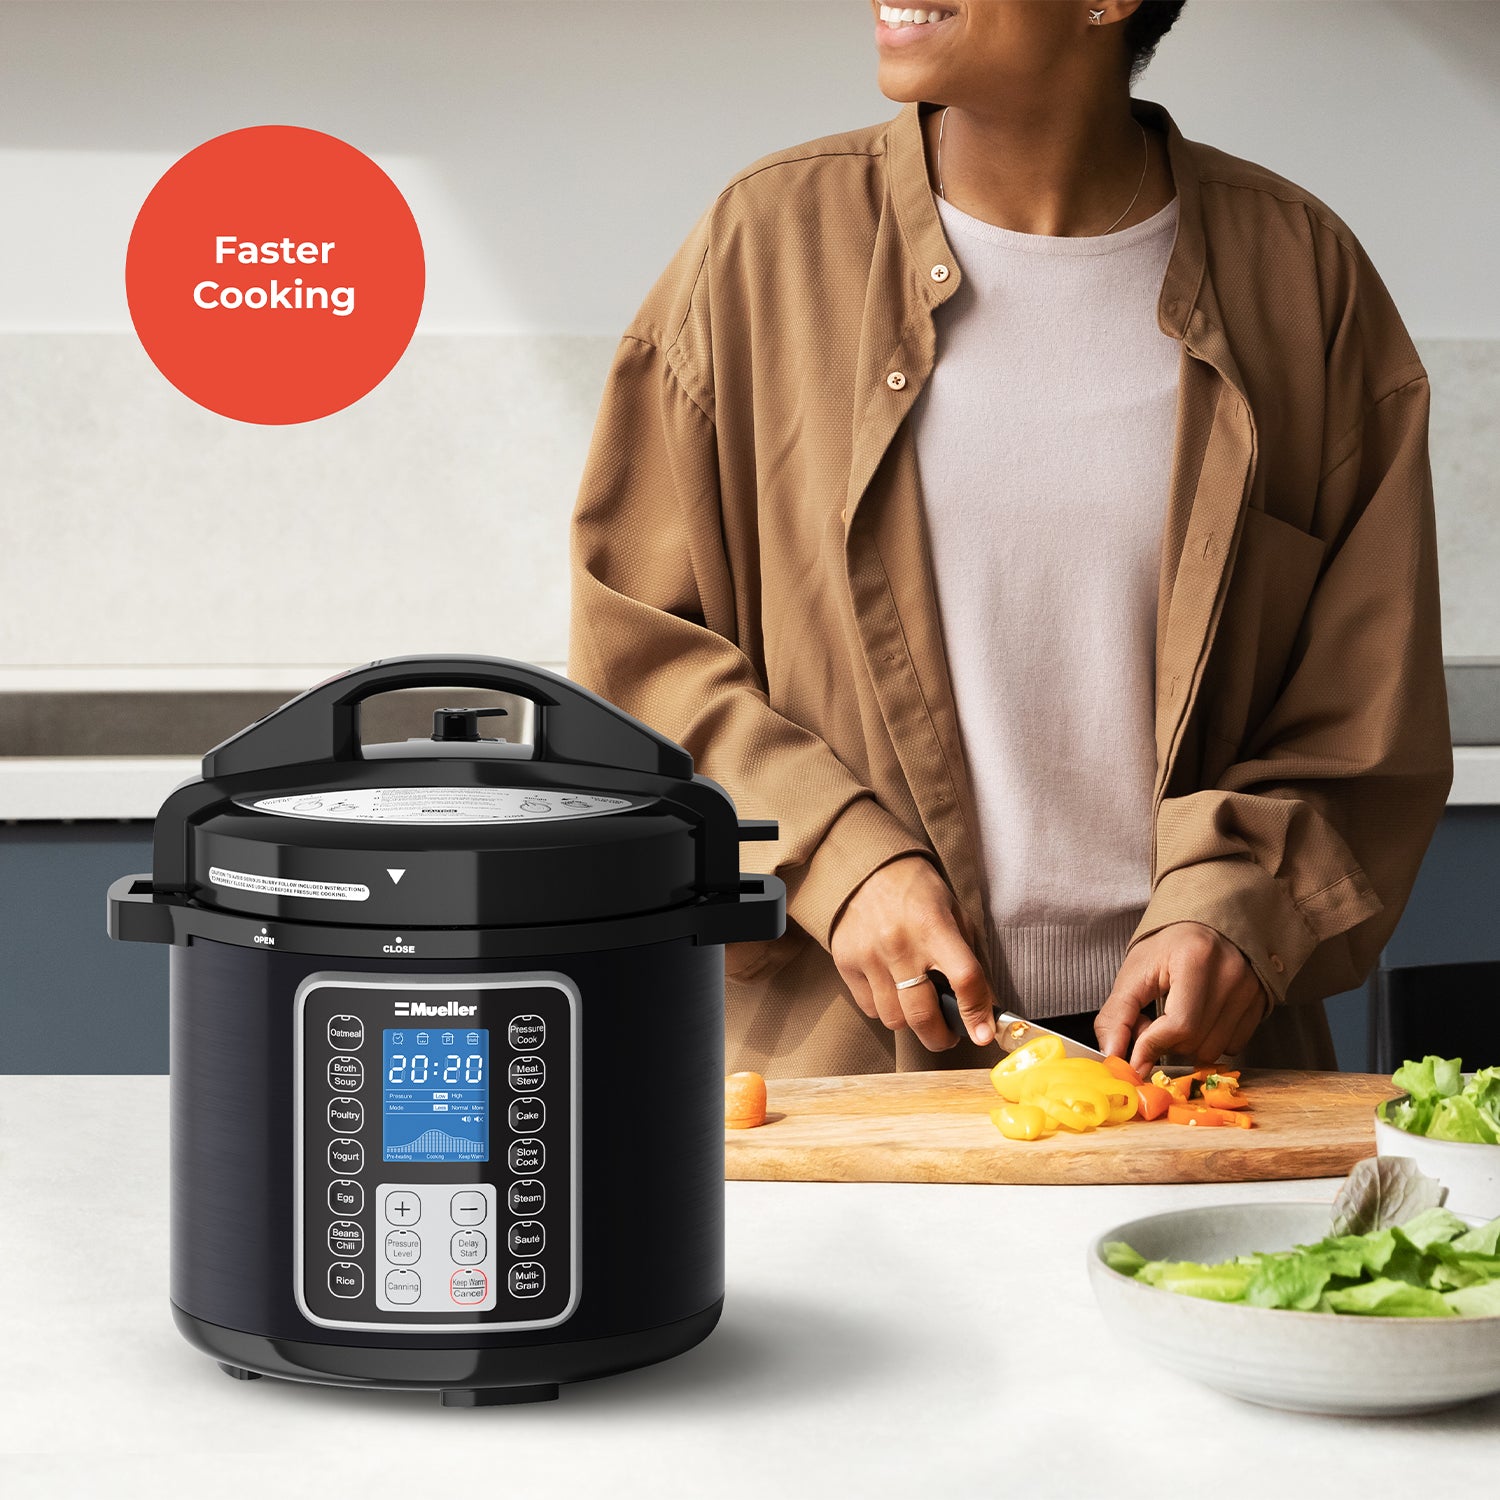 2021 6qt Instant Pot Pro Plus Wifi Smart Multi Cooker, 10-in-1 Pressure  Cooker Unboxing + First Cook 